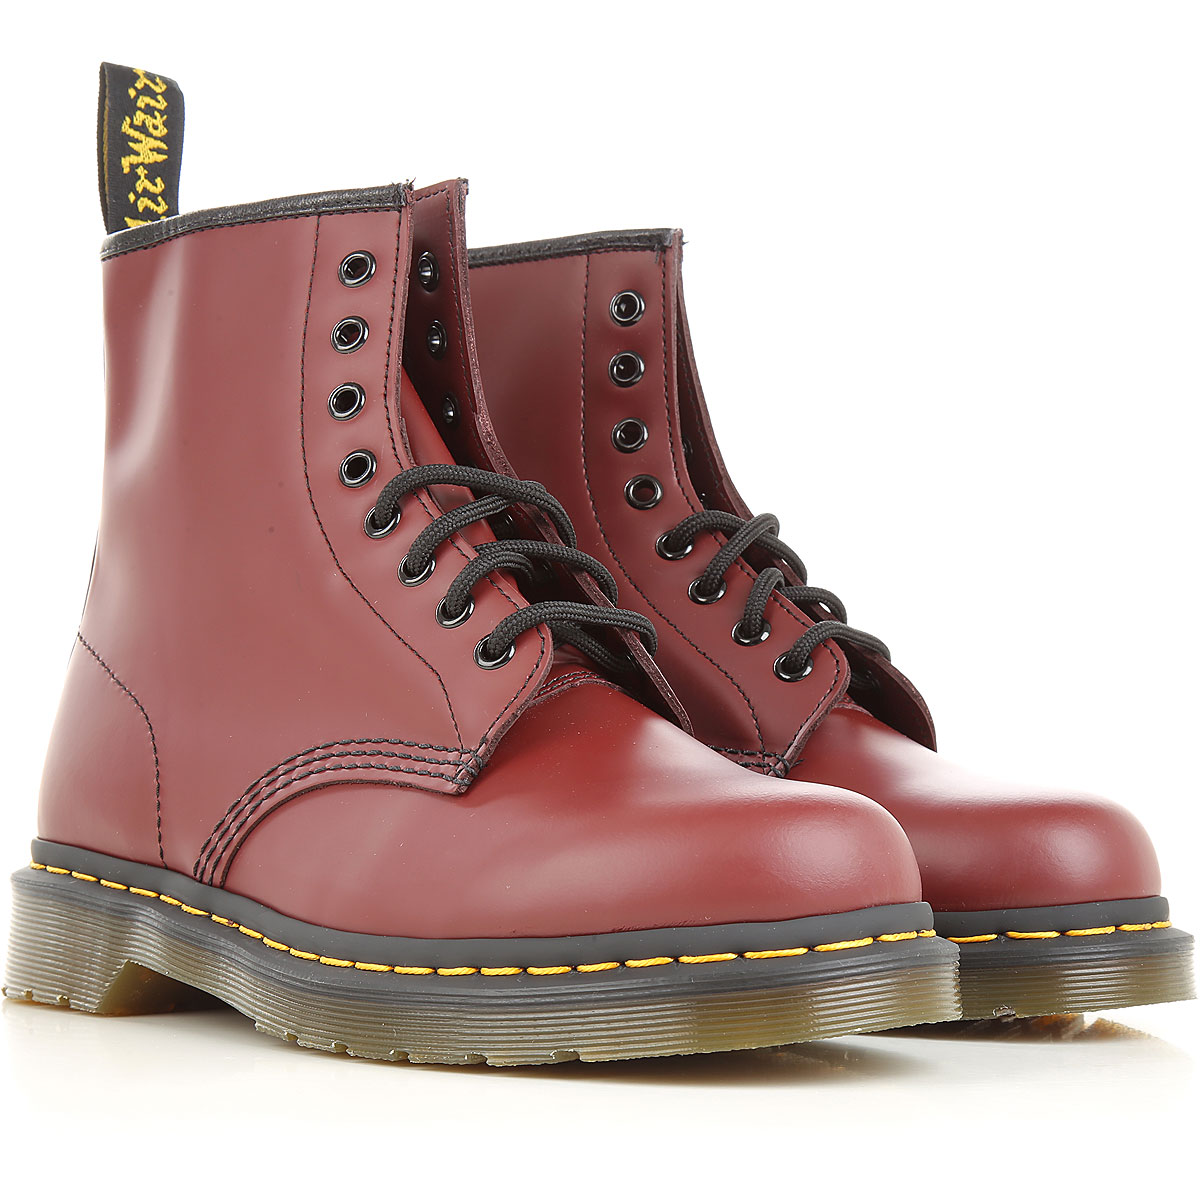 Mens Shoes Dr. Martens, Style code: 1460-pascal-10072600